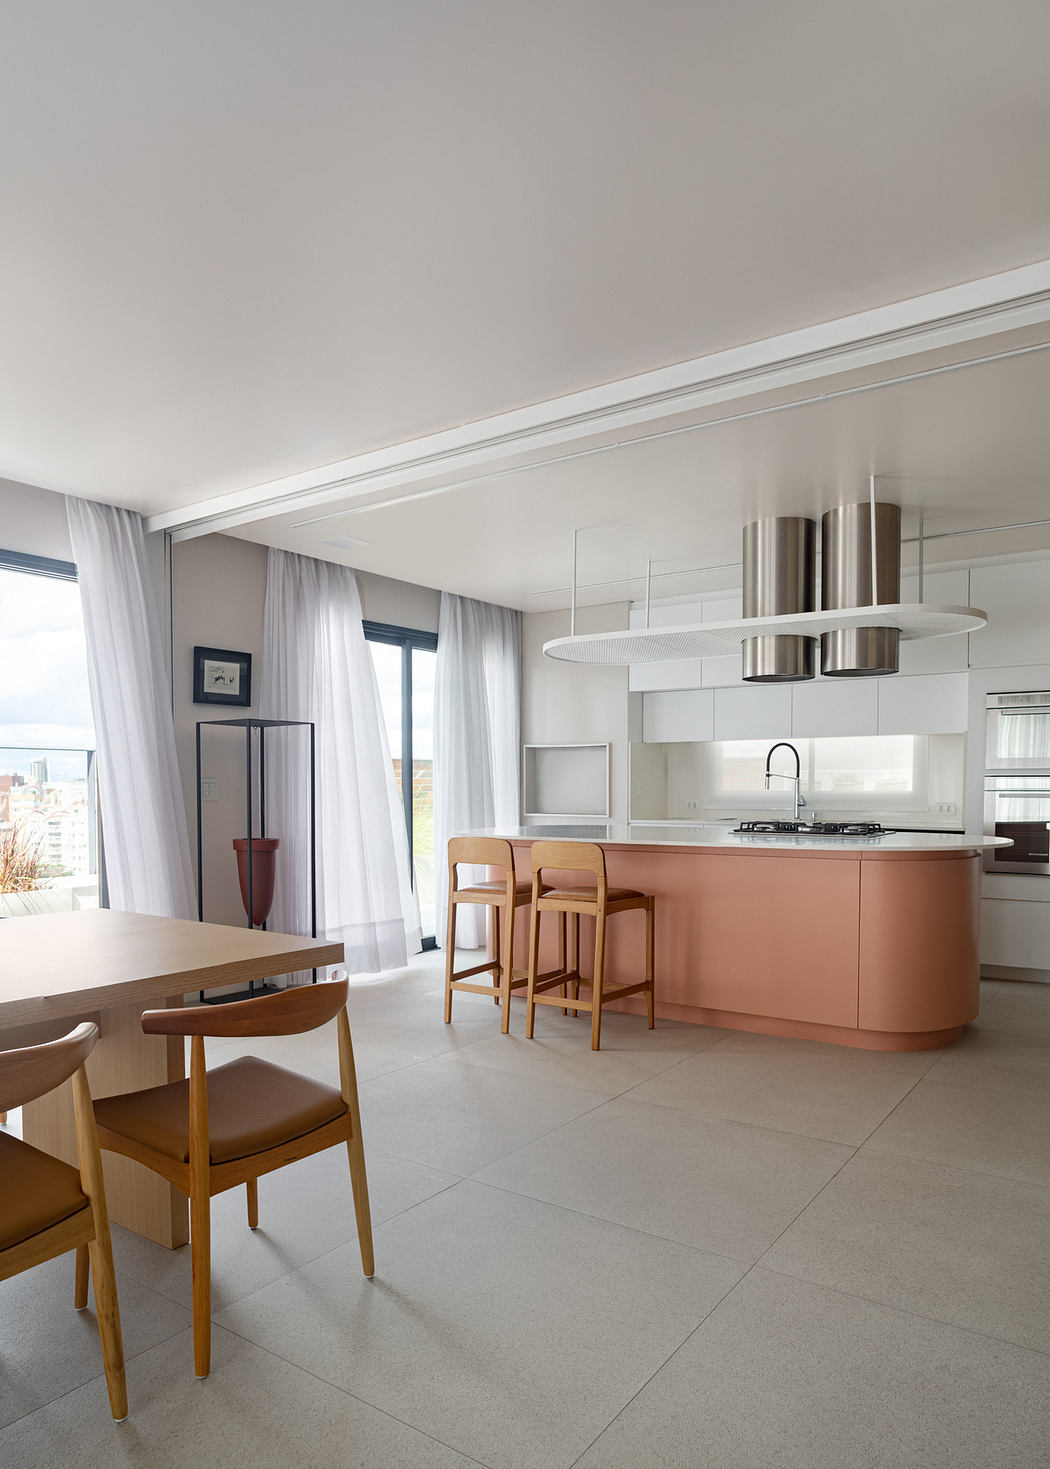 Modern kitchen with a pink island, wooden dining table, and light gray curtains.